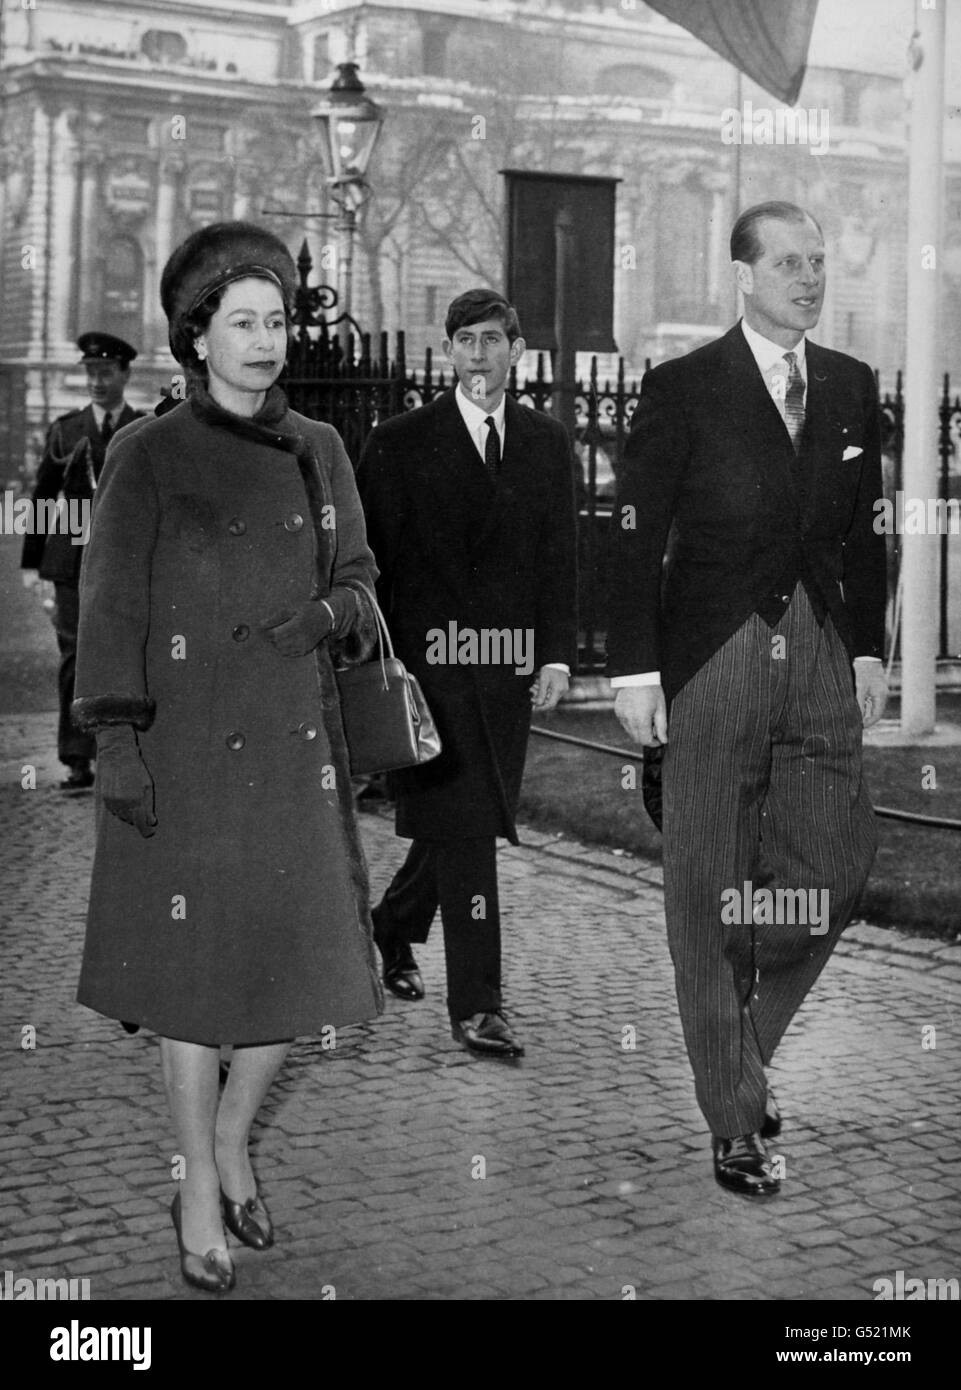 Queen Elizabeth II and the Duke of Edinburgh, followed by the Prince of Wales as they arrive at the West Door of Westminster Abbey, London to attend with other members of the Royal family a service marking the 900th anniversary of the consecration of the first Abbey church in 1065. Stock Photo